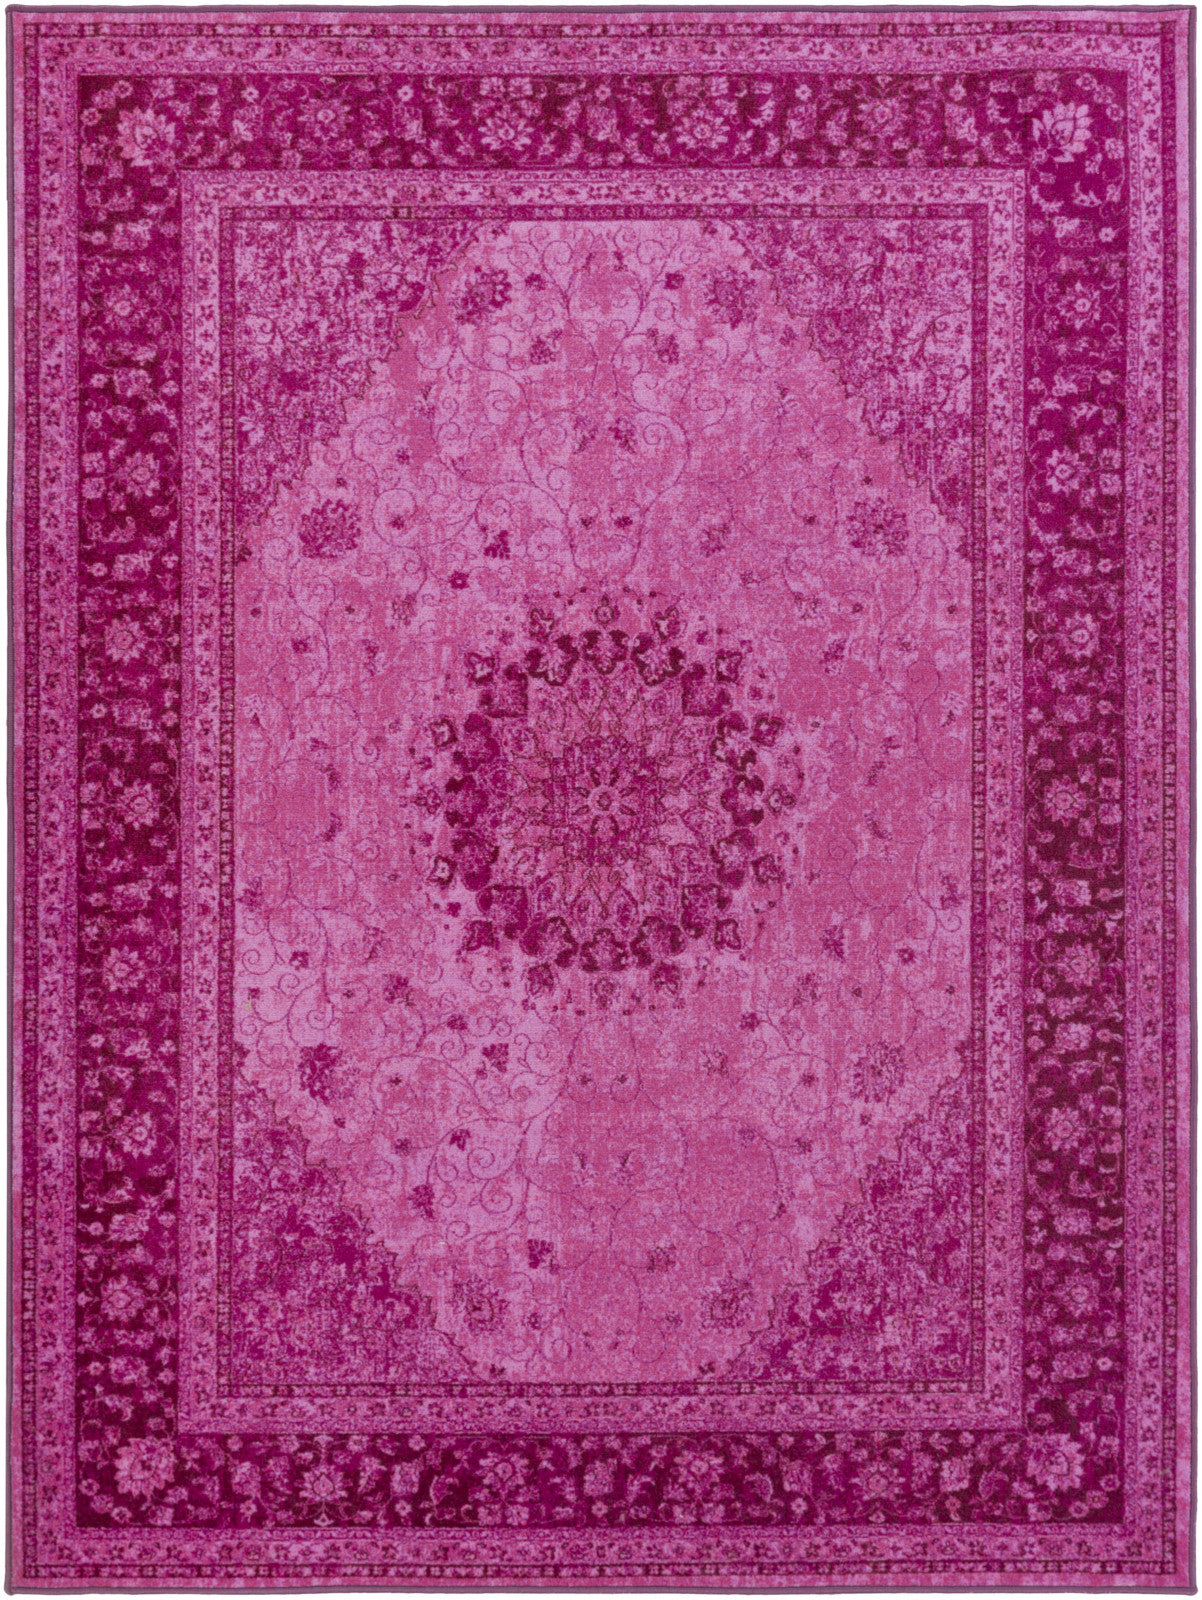 Artistic Weavers Saturn Chase Hot Pink/Carnation Pink Area Rug main image